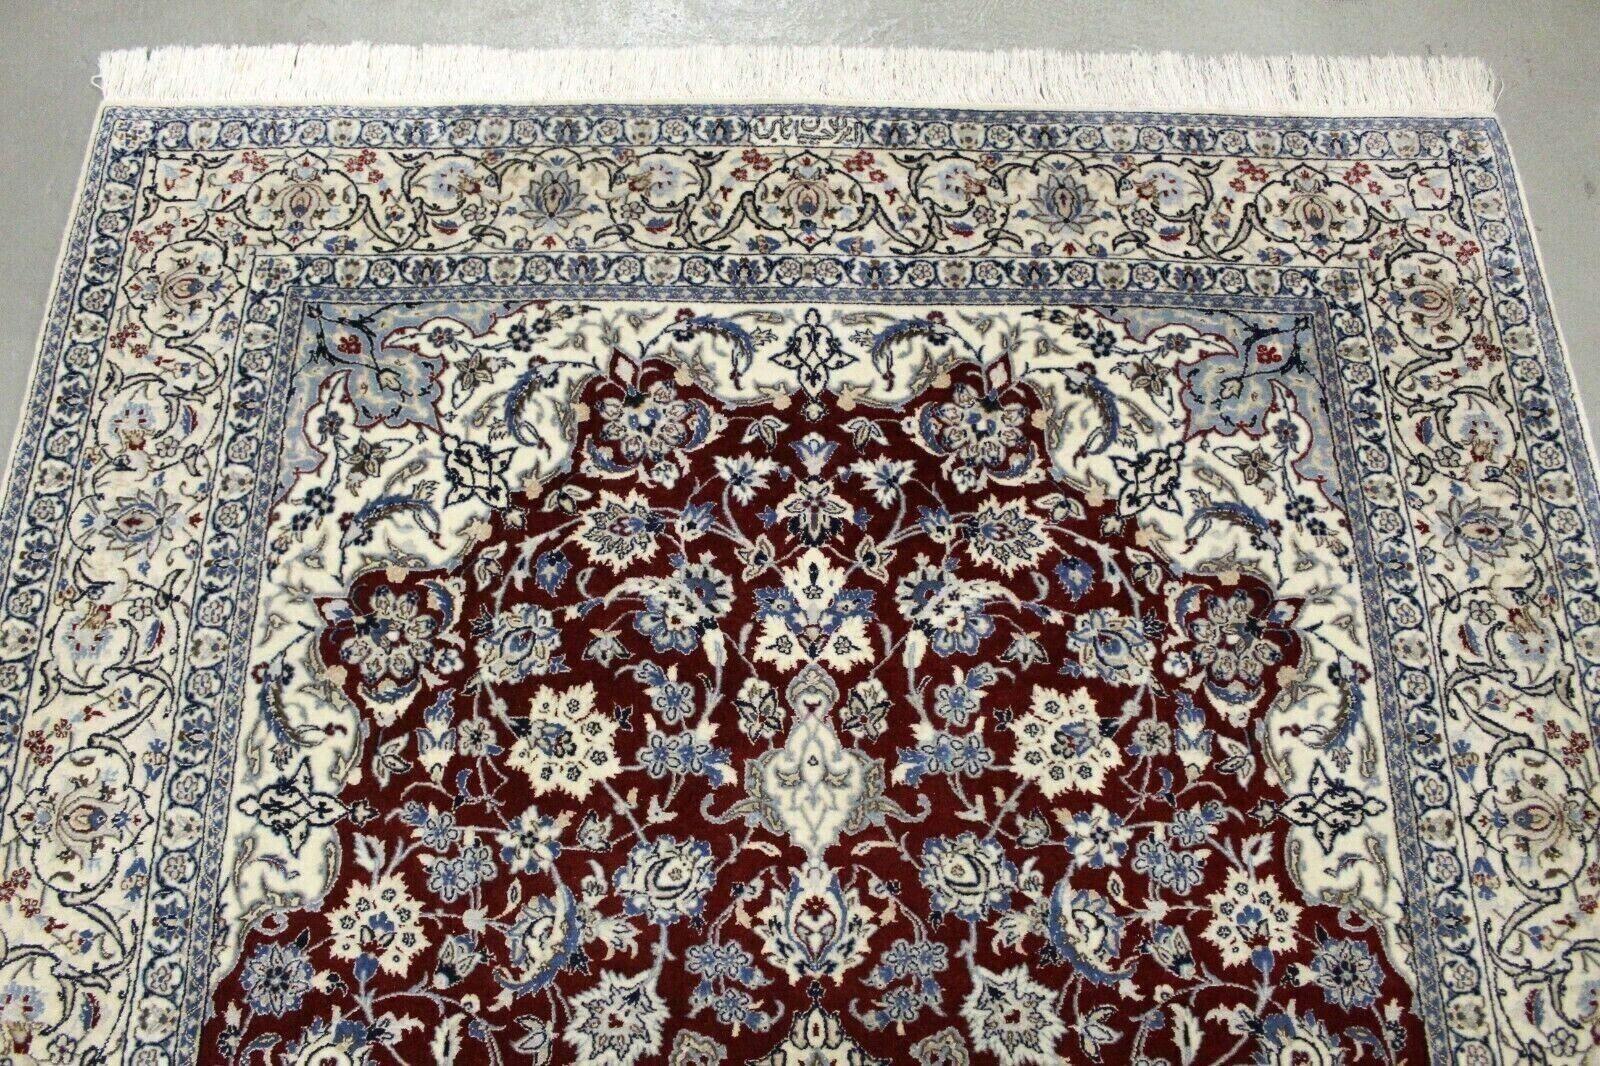 Introducing our exquisite Handmade Vintage Persian Style Nain Rug, a captivating piece that brings timeless elegance to any space. Measuring approximately 4.1’ x 6.3’ (126cm x 193cm), this rug from the 1970s is meticulously crafted from the finest